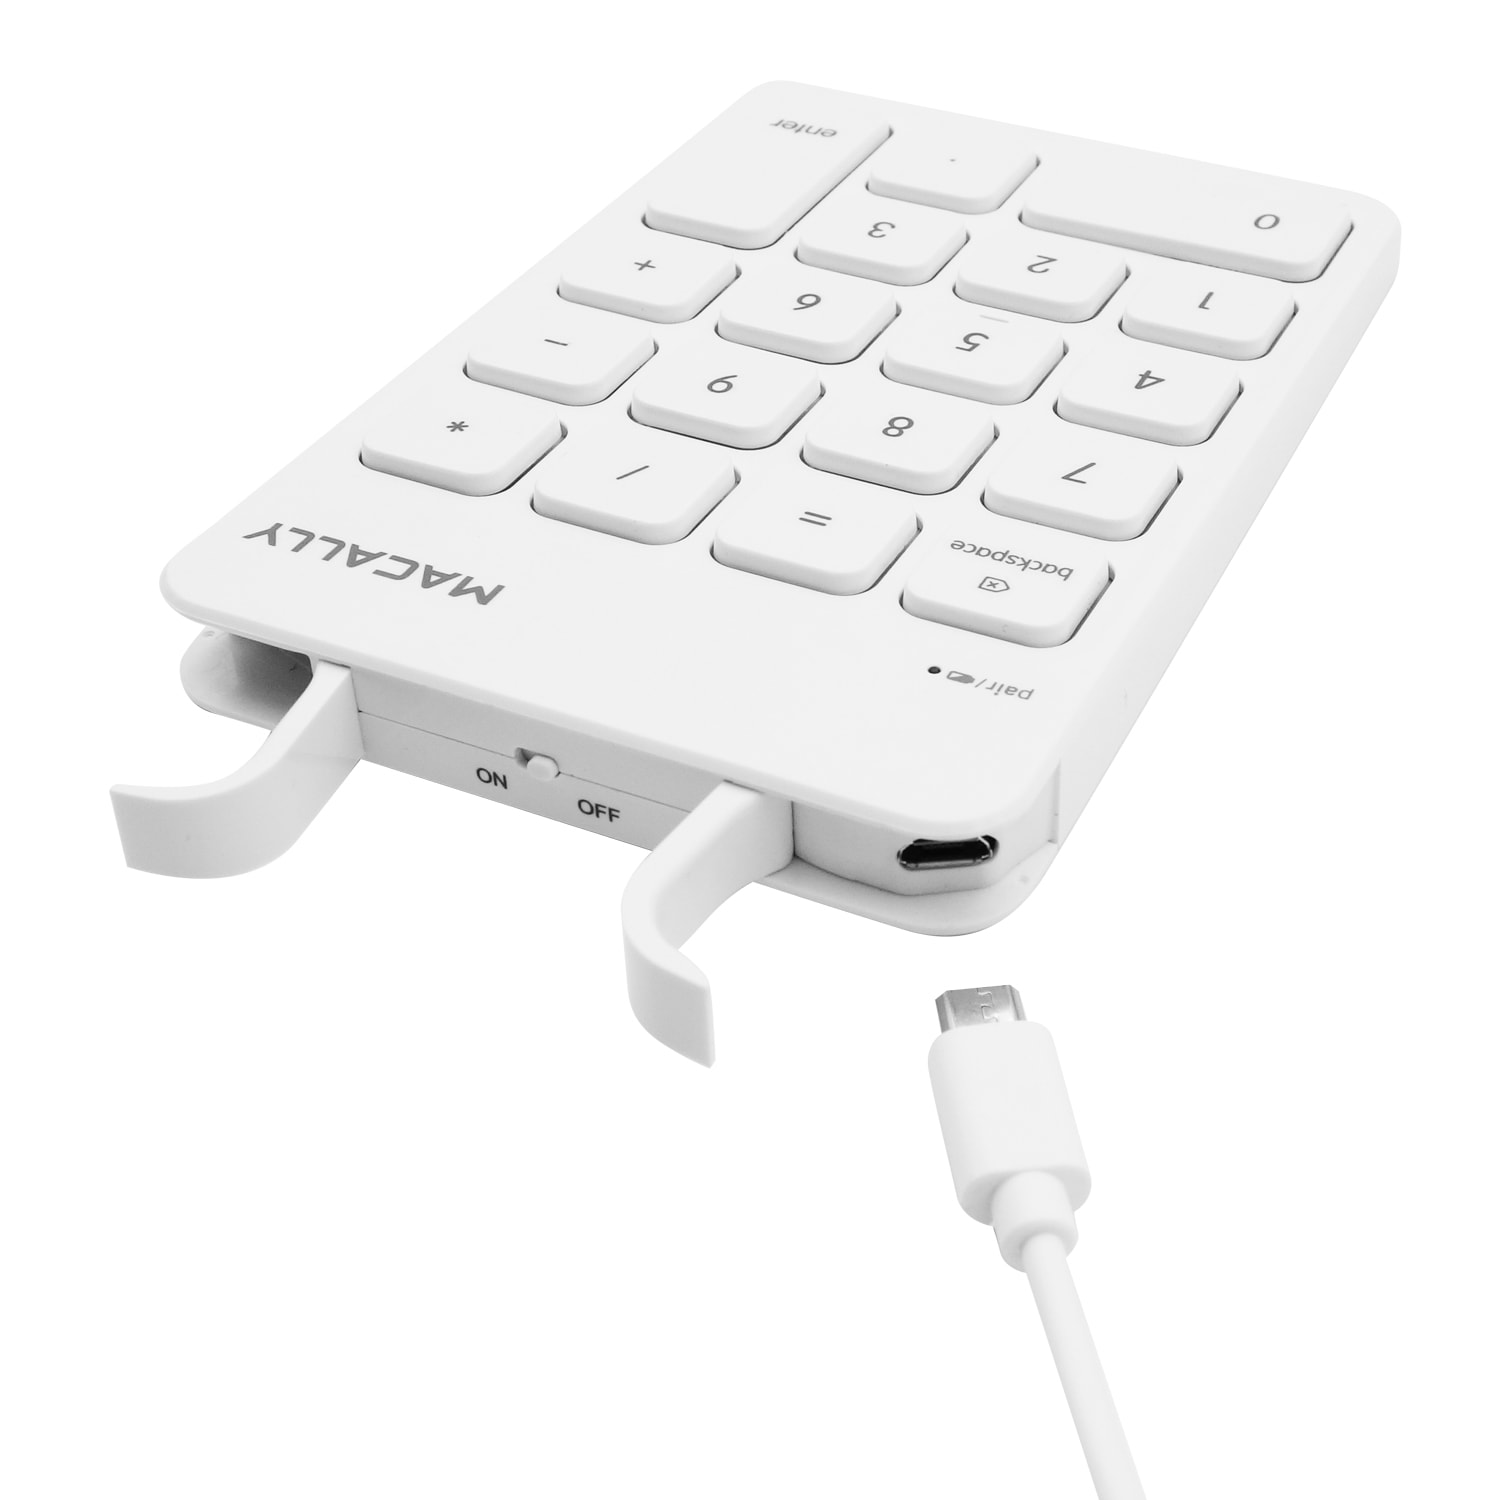 Macally Wireless Bluetooth Numeric Keypad Keyboard For Laptop, Mac Imac Macbook Pro/air, Ipad Windows Pc, Tablet, or Desktop Computer Rechargeable 18 Slim Number Pad Numerical Numpad- White in the Computers